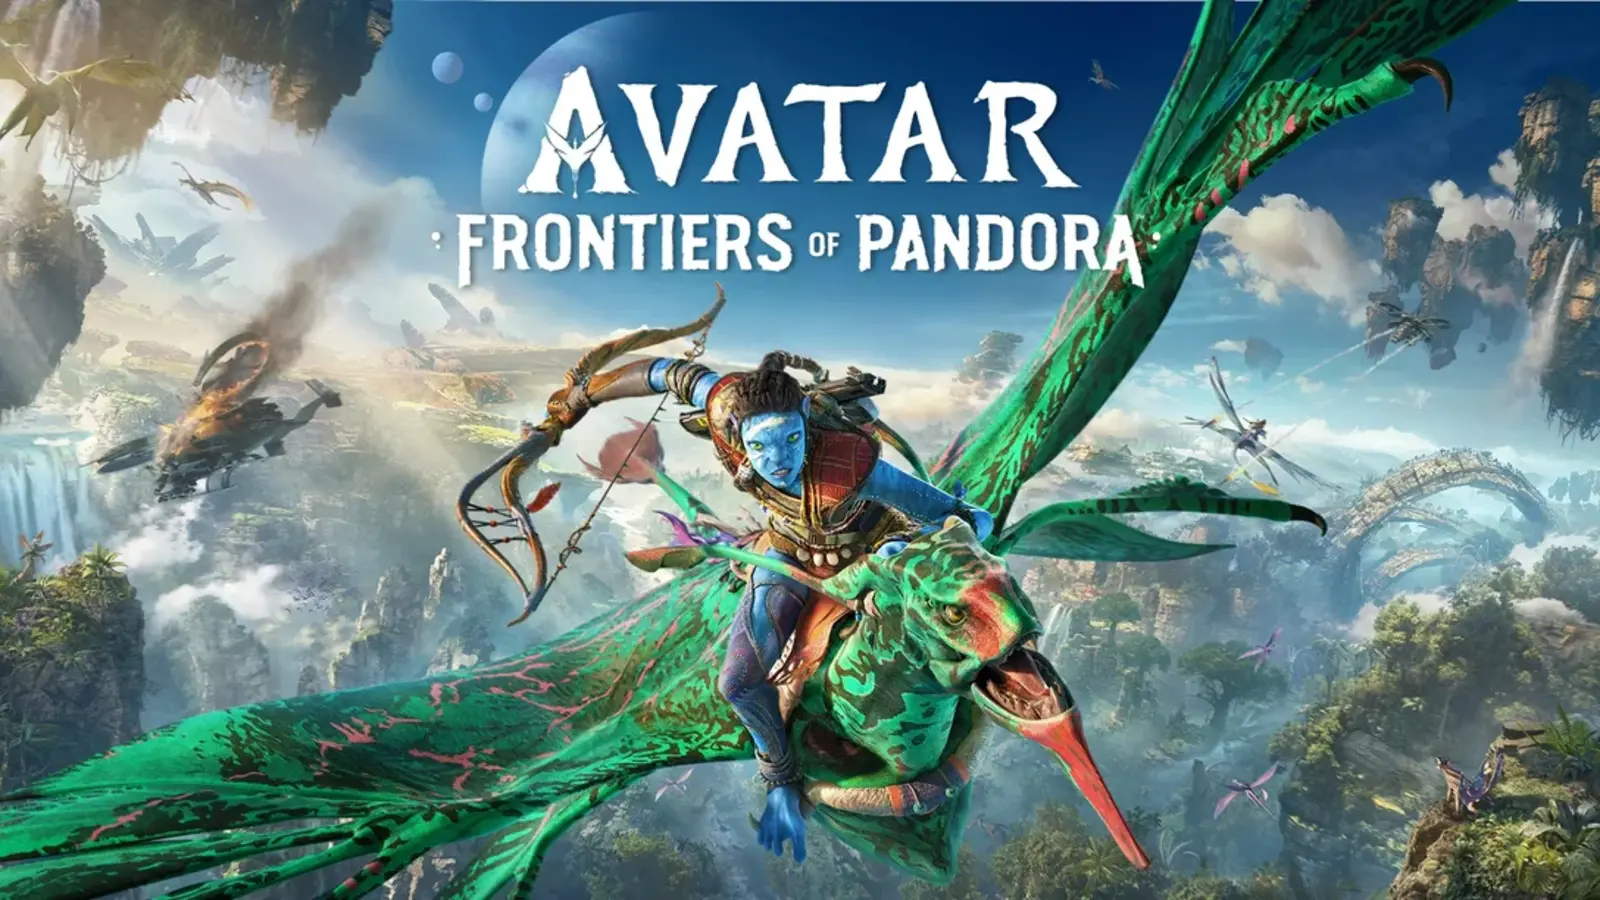 Fix is finally in the works for Avatar: Frontier of Pandora ‘The Missing Hunter’ quest bug